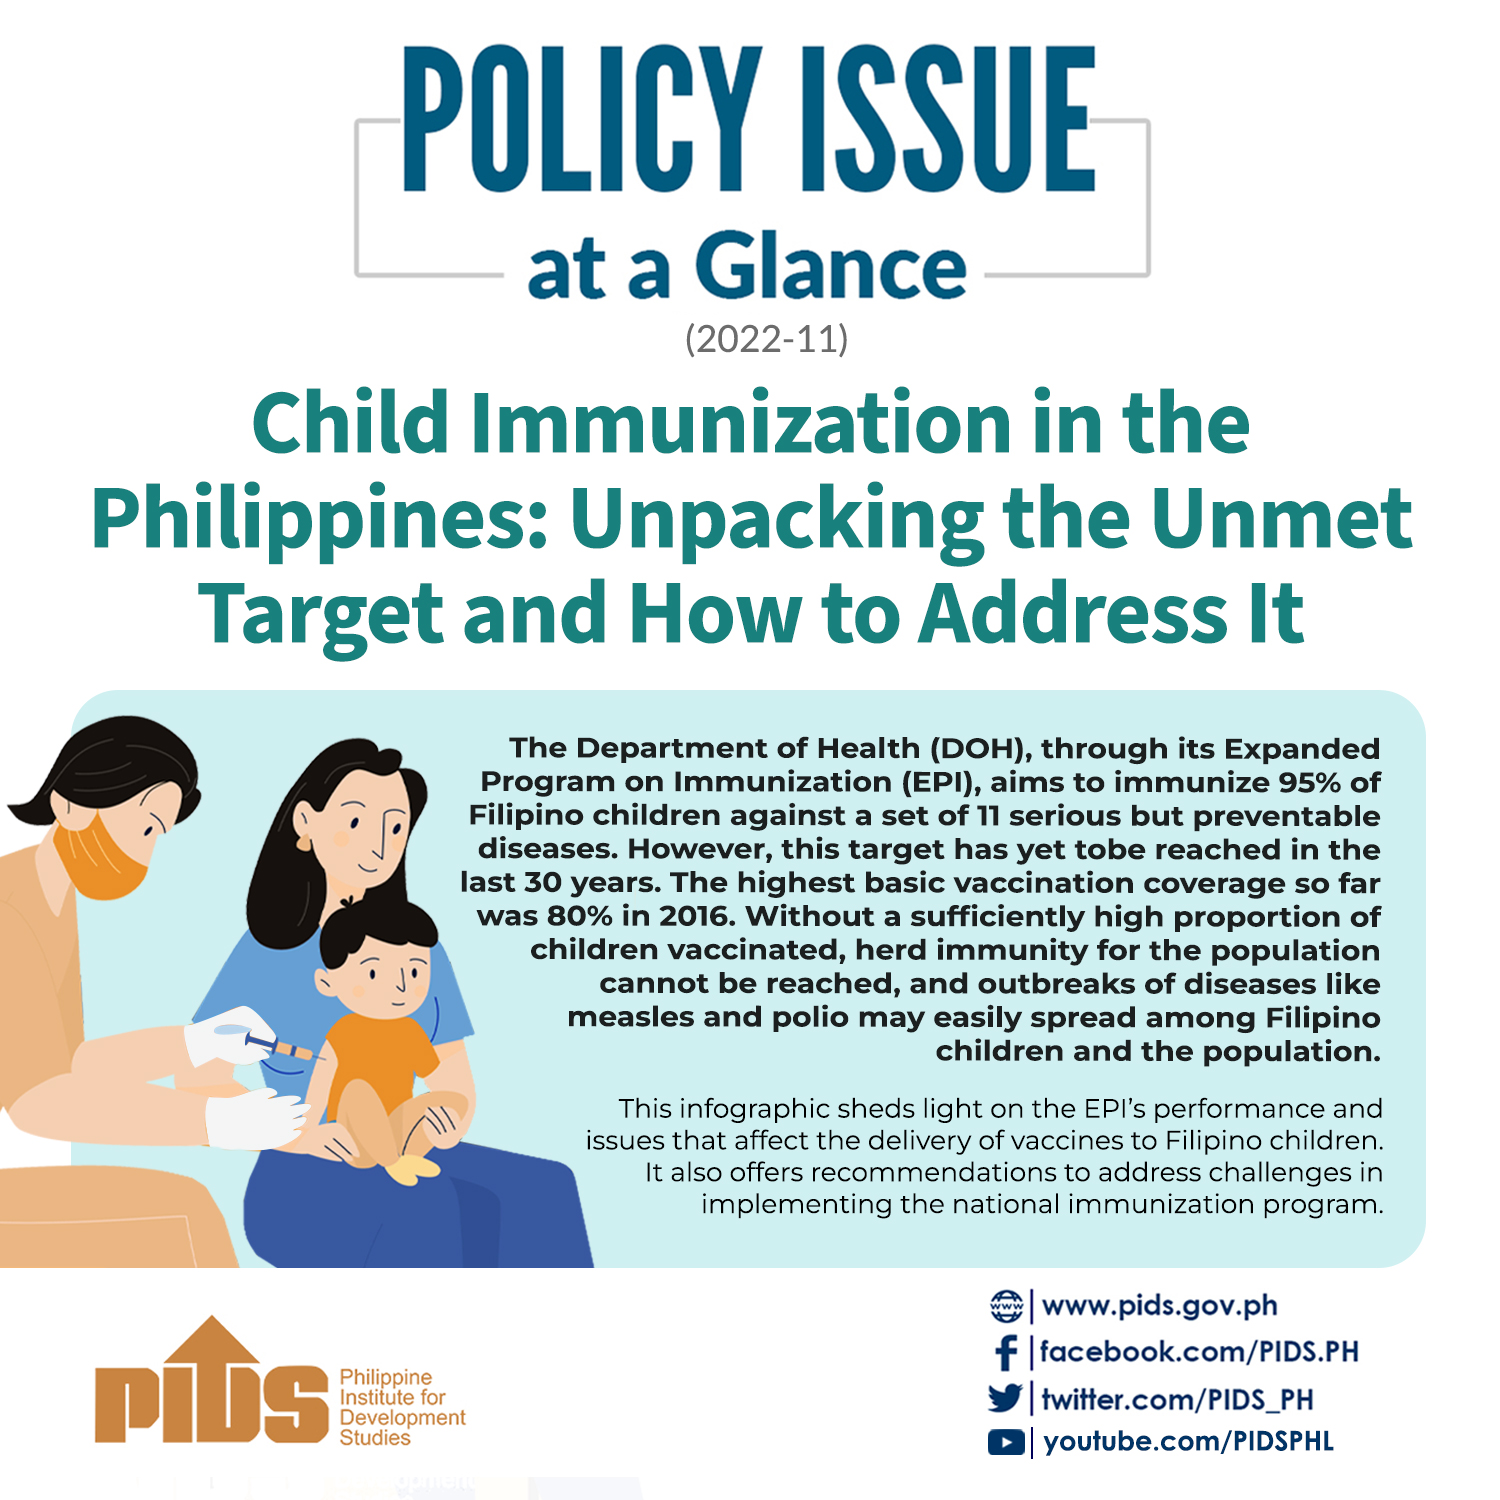 POLICY ISSUE AT A GLANCE Child Immunization in the Philippines: Unpacking the Unmet Target and How to Address It-PIG_1.png